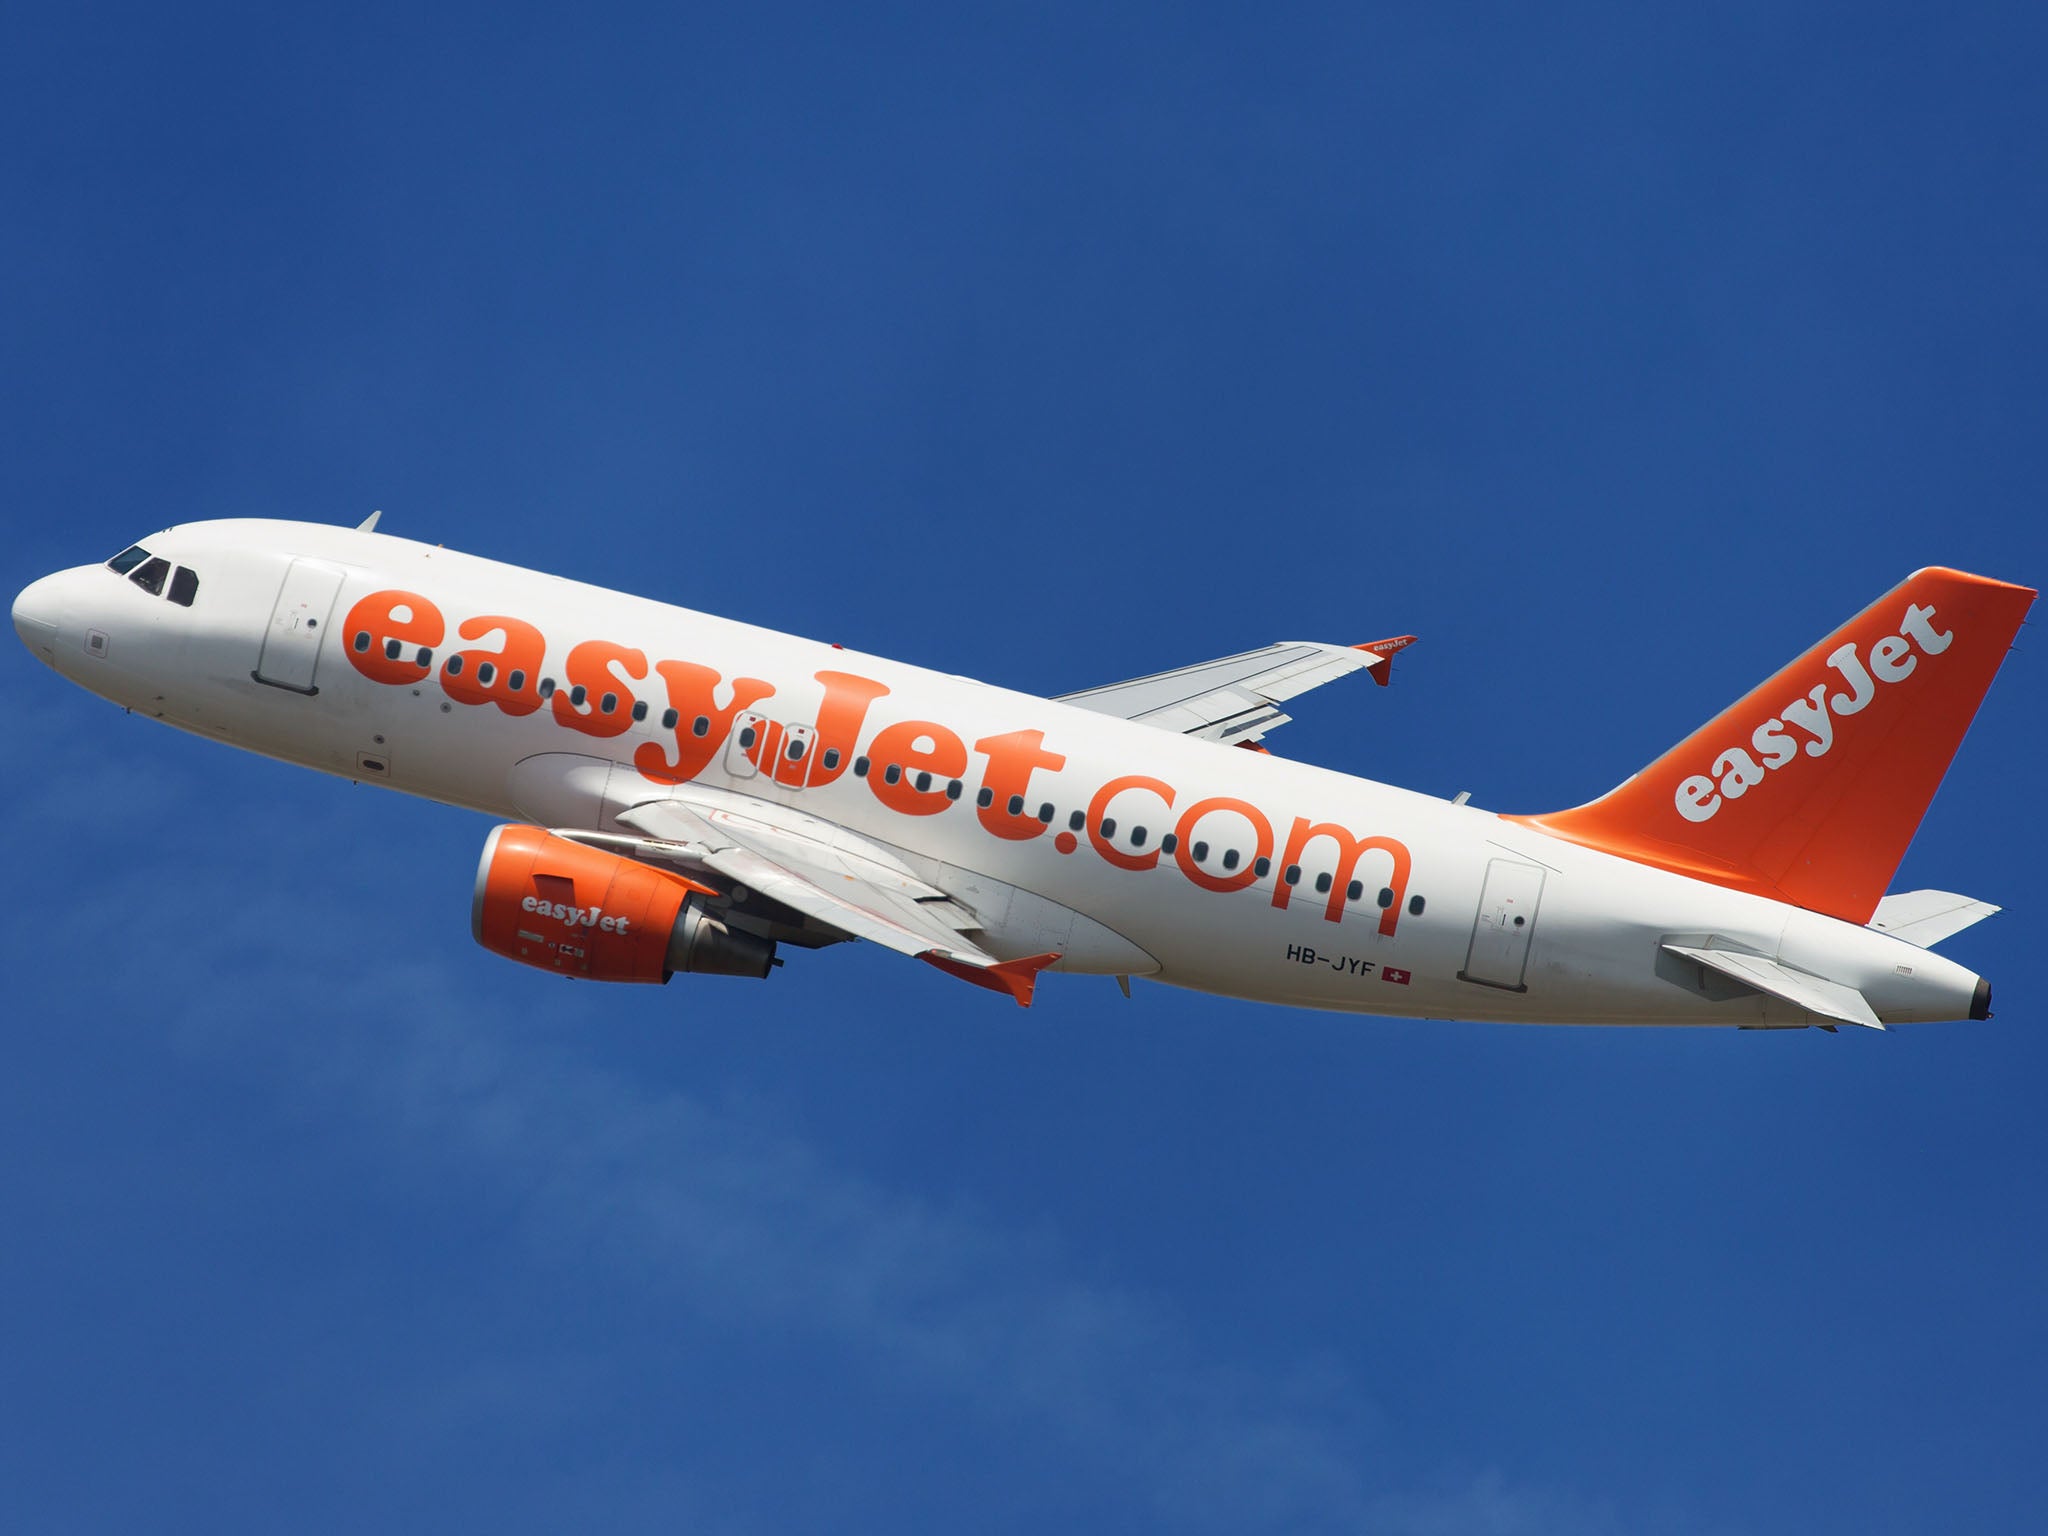 EasyJet’s share price dropped 7 per cent on Monday after the announcement